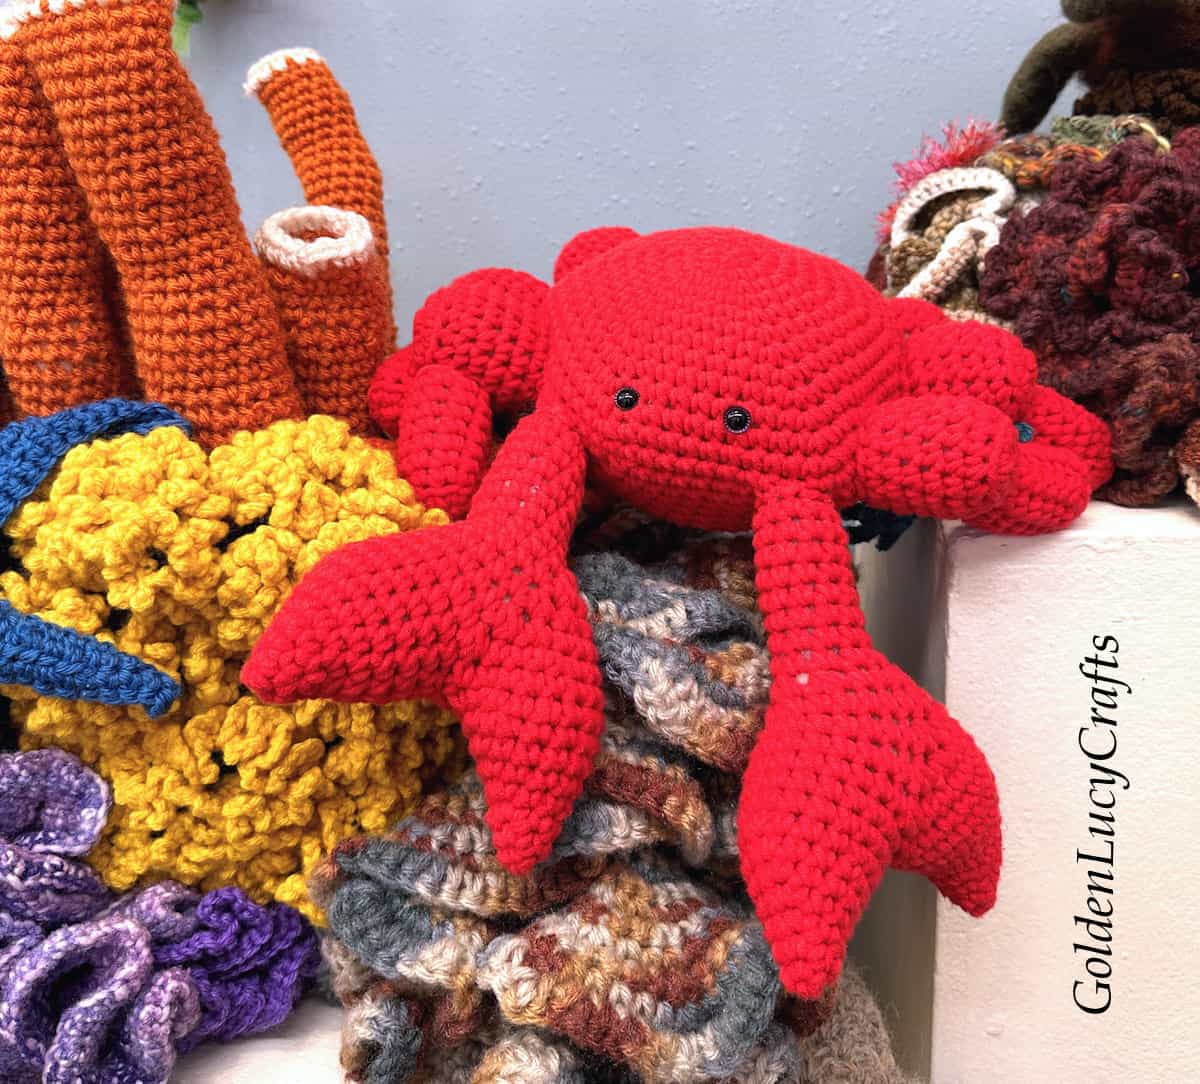 Crocheted corals and crab.